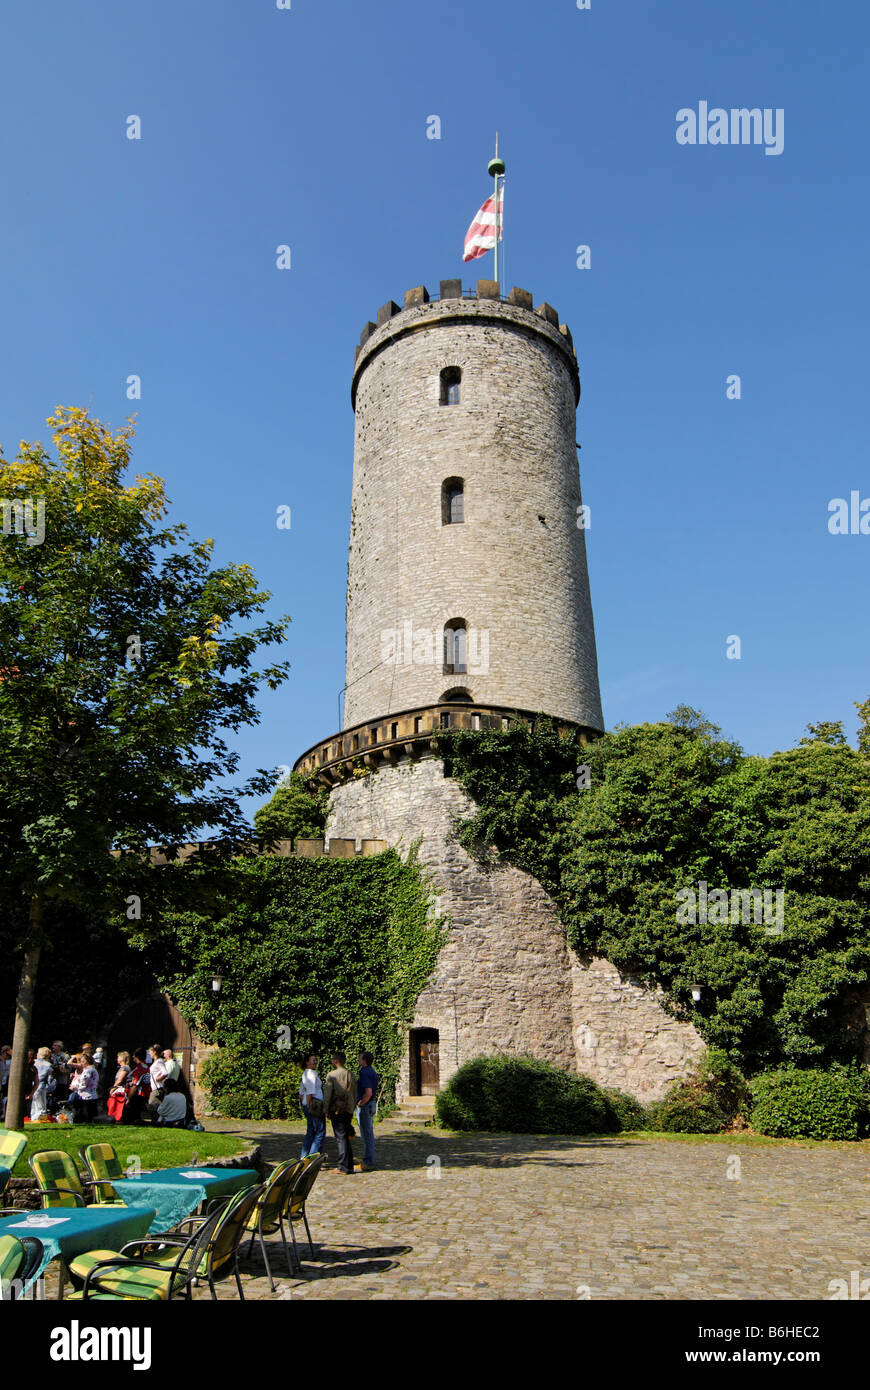 Tower of the Sparrenburg Castle in Bielefeld city Germany Stock Photo